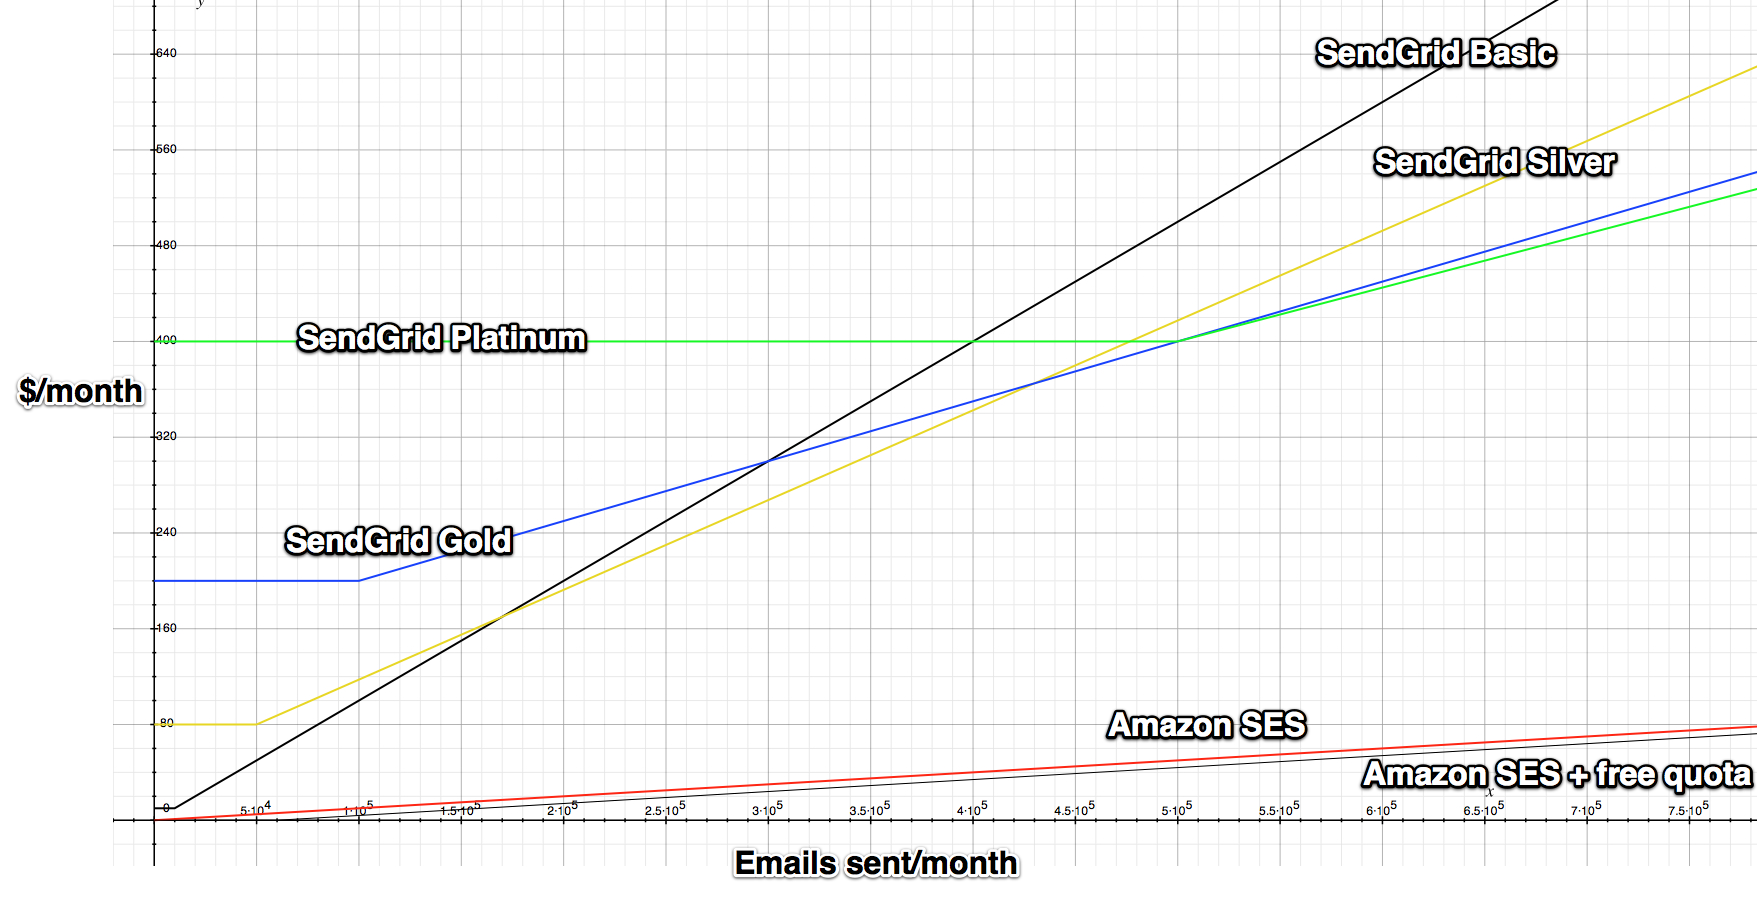 A graph showing the difference between prices for Sendgrid and AWS SES